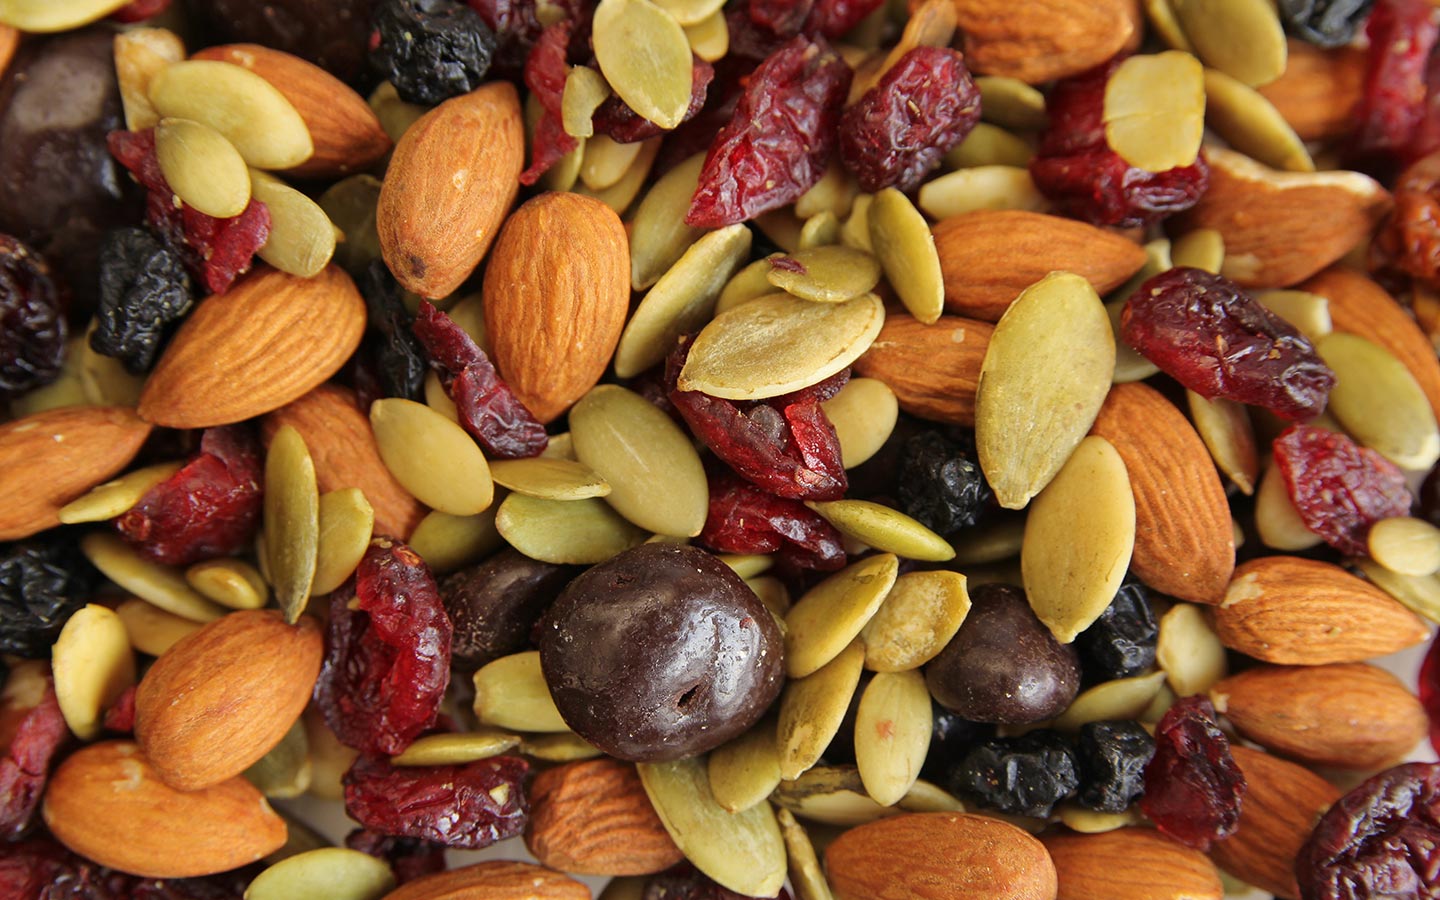 Nuts are one of the trends for snacking